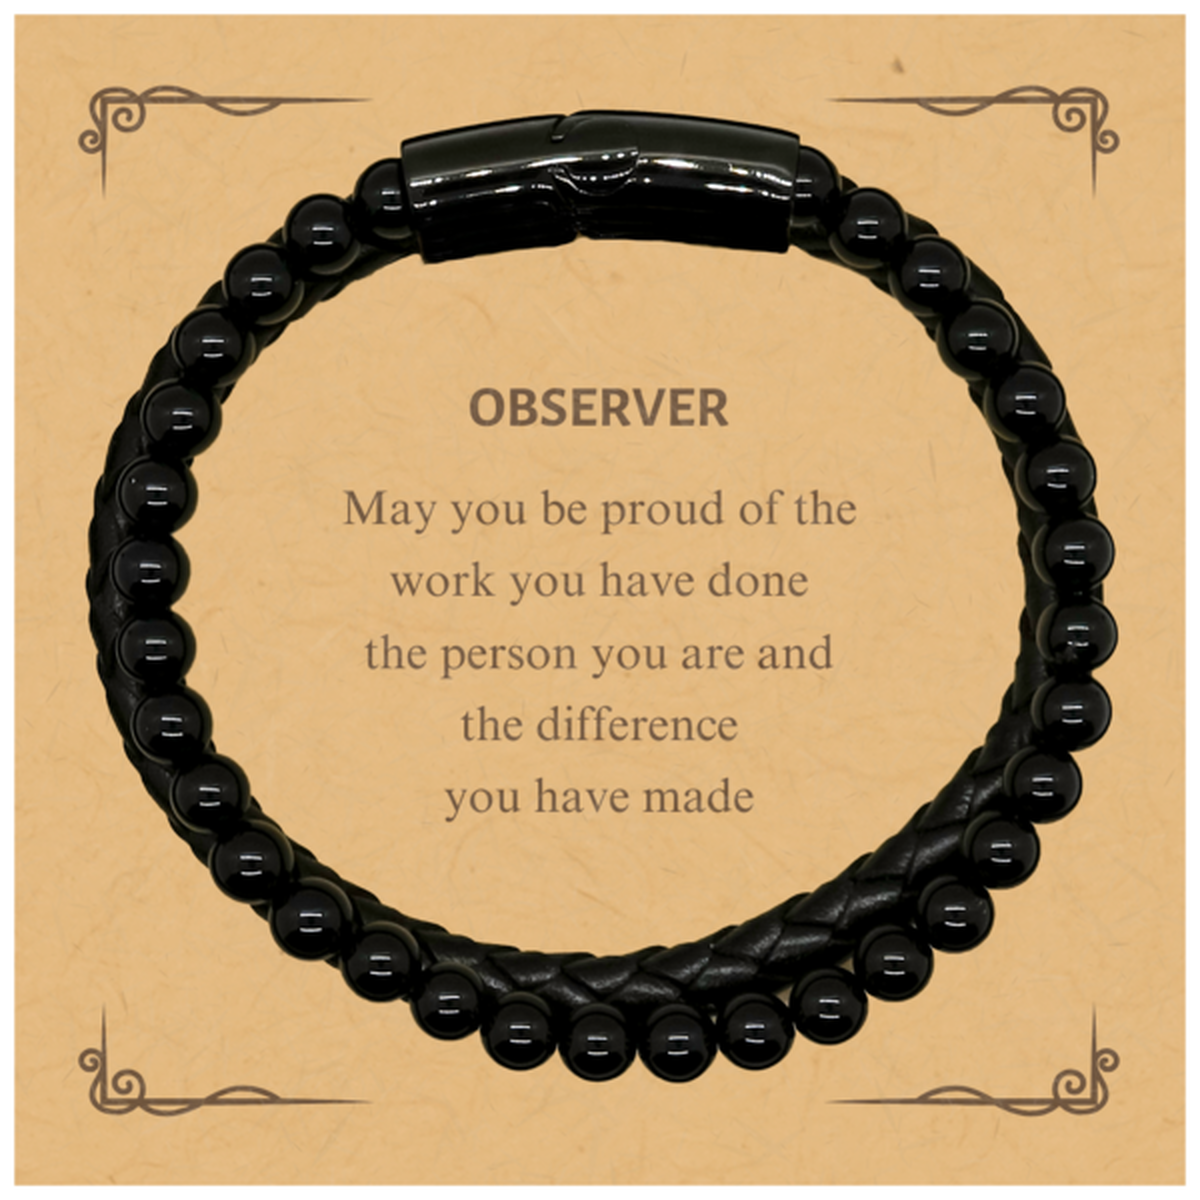 Observer May you be proud of the work you have done, Retirement Observer Stone Leather Bracelets for Colleague Appreciation Gifts Amazing for Observer